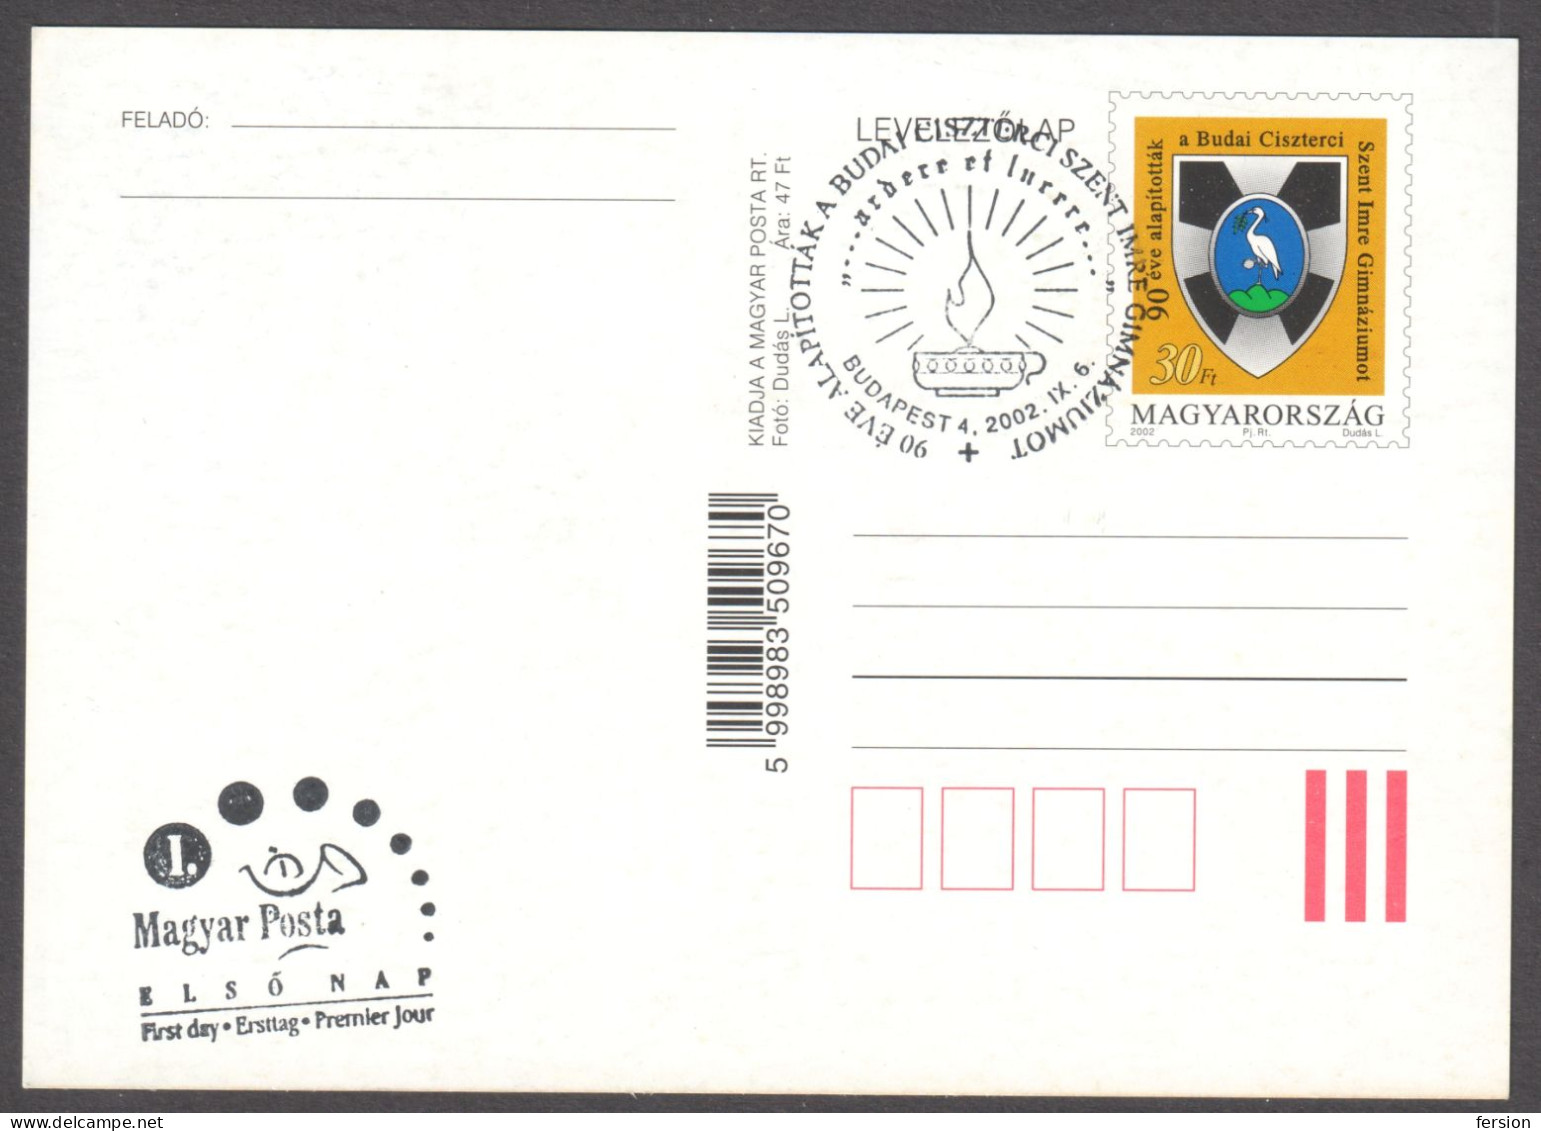 Cistercian Order Gymnasium School 2002 HUNGARY Coat Of Arms Stork Bird STATIONERY POSTCARD Not Used FDC Christianity - Christentum